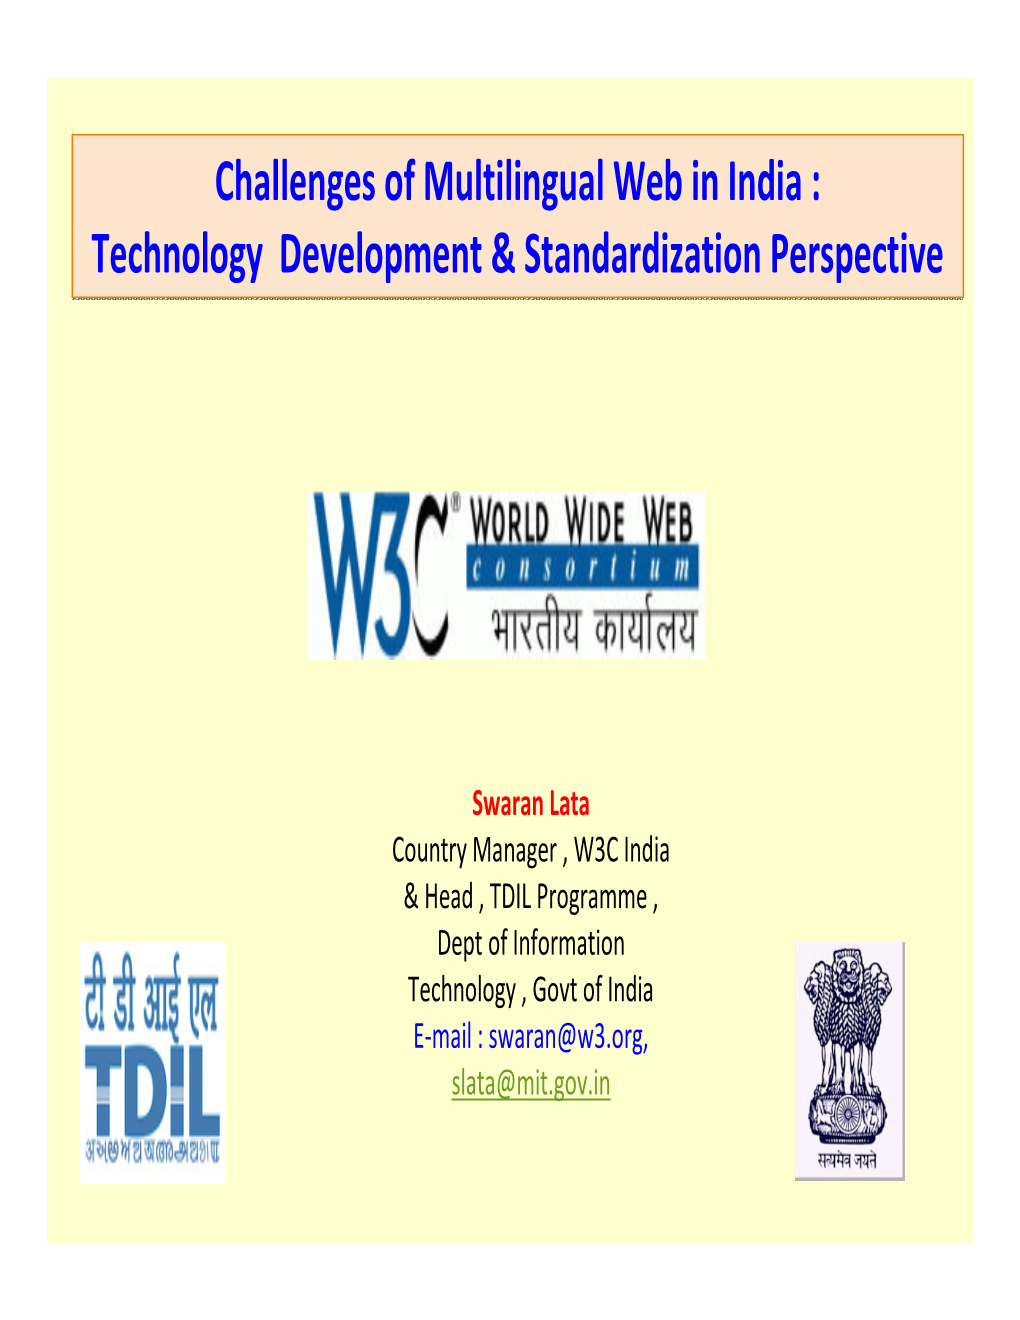 Challenges of Multilingual Web in India : Technology Development & Standardization Perspective